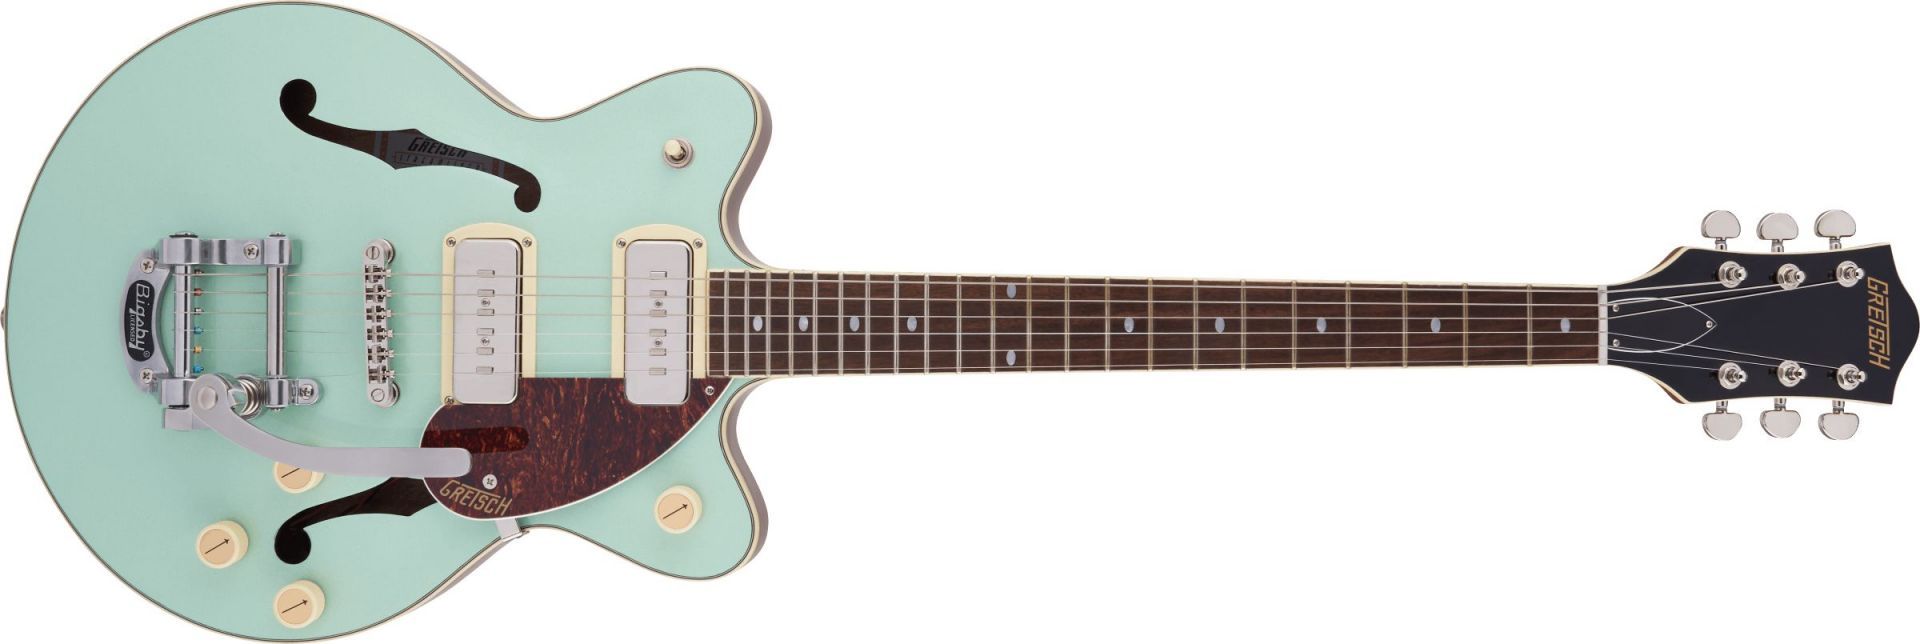 Gretsch Guitars G2655T-P90 Streamliner Center Block Jr. Double-Cut P90 with Bigsby Two-Tone Mint Metallic with Vintage Mahogany Stain